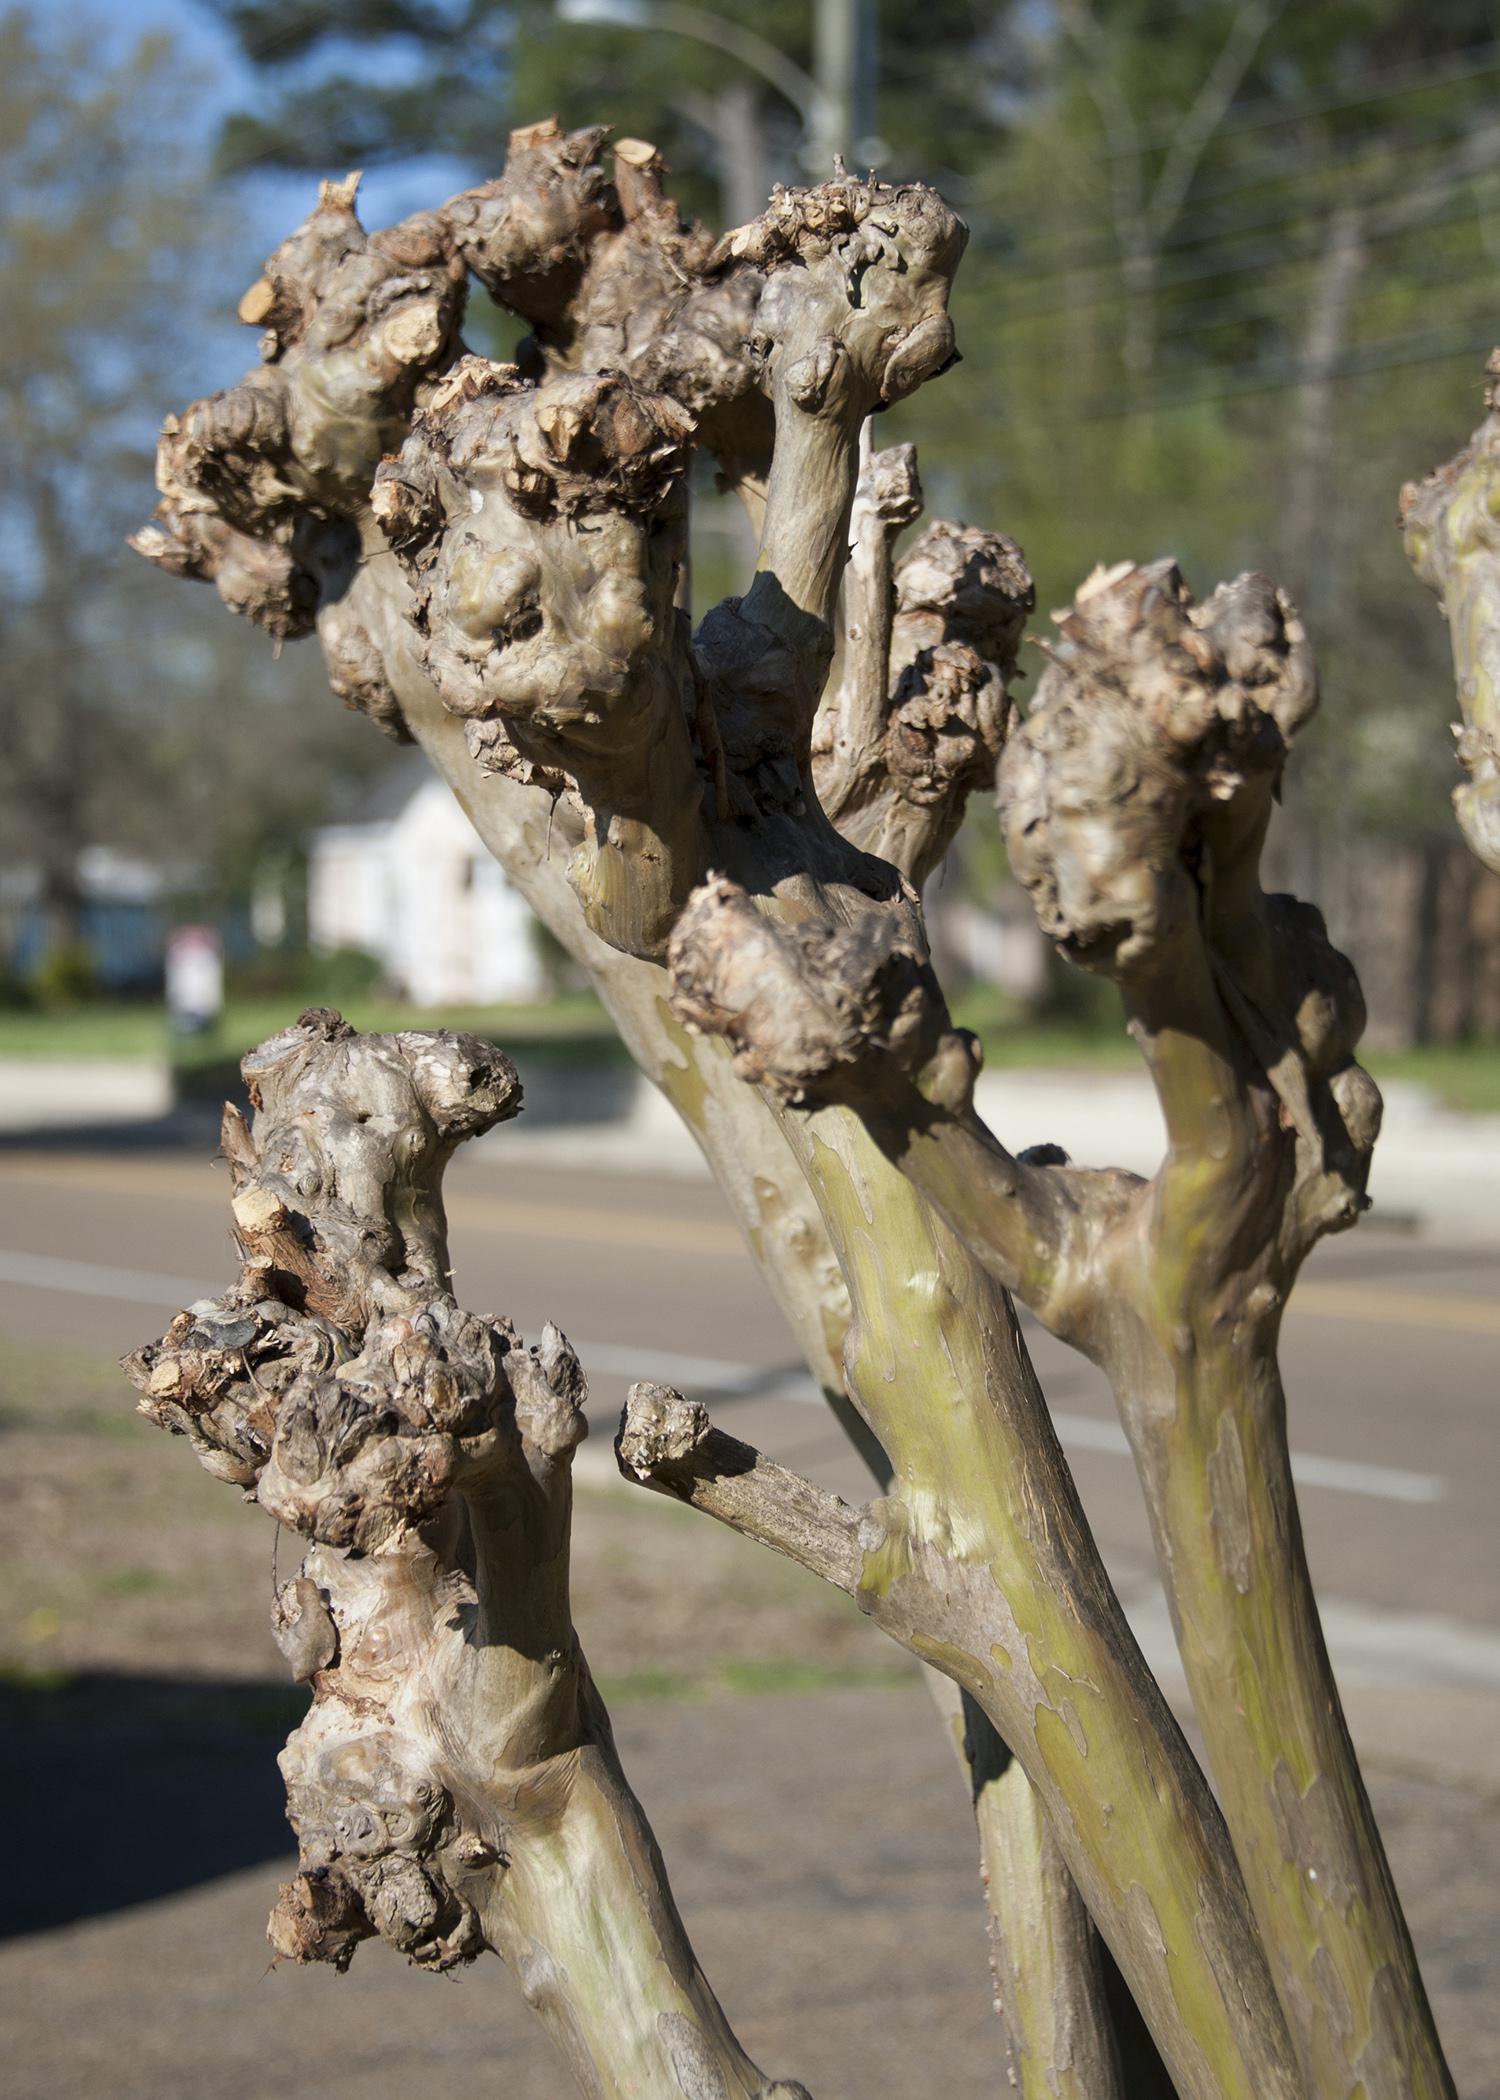 A severely pruned crape myrtle displays large knobs instead of smooth branches. 